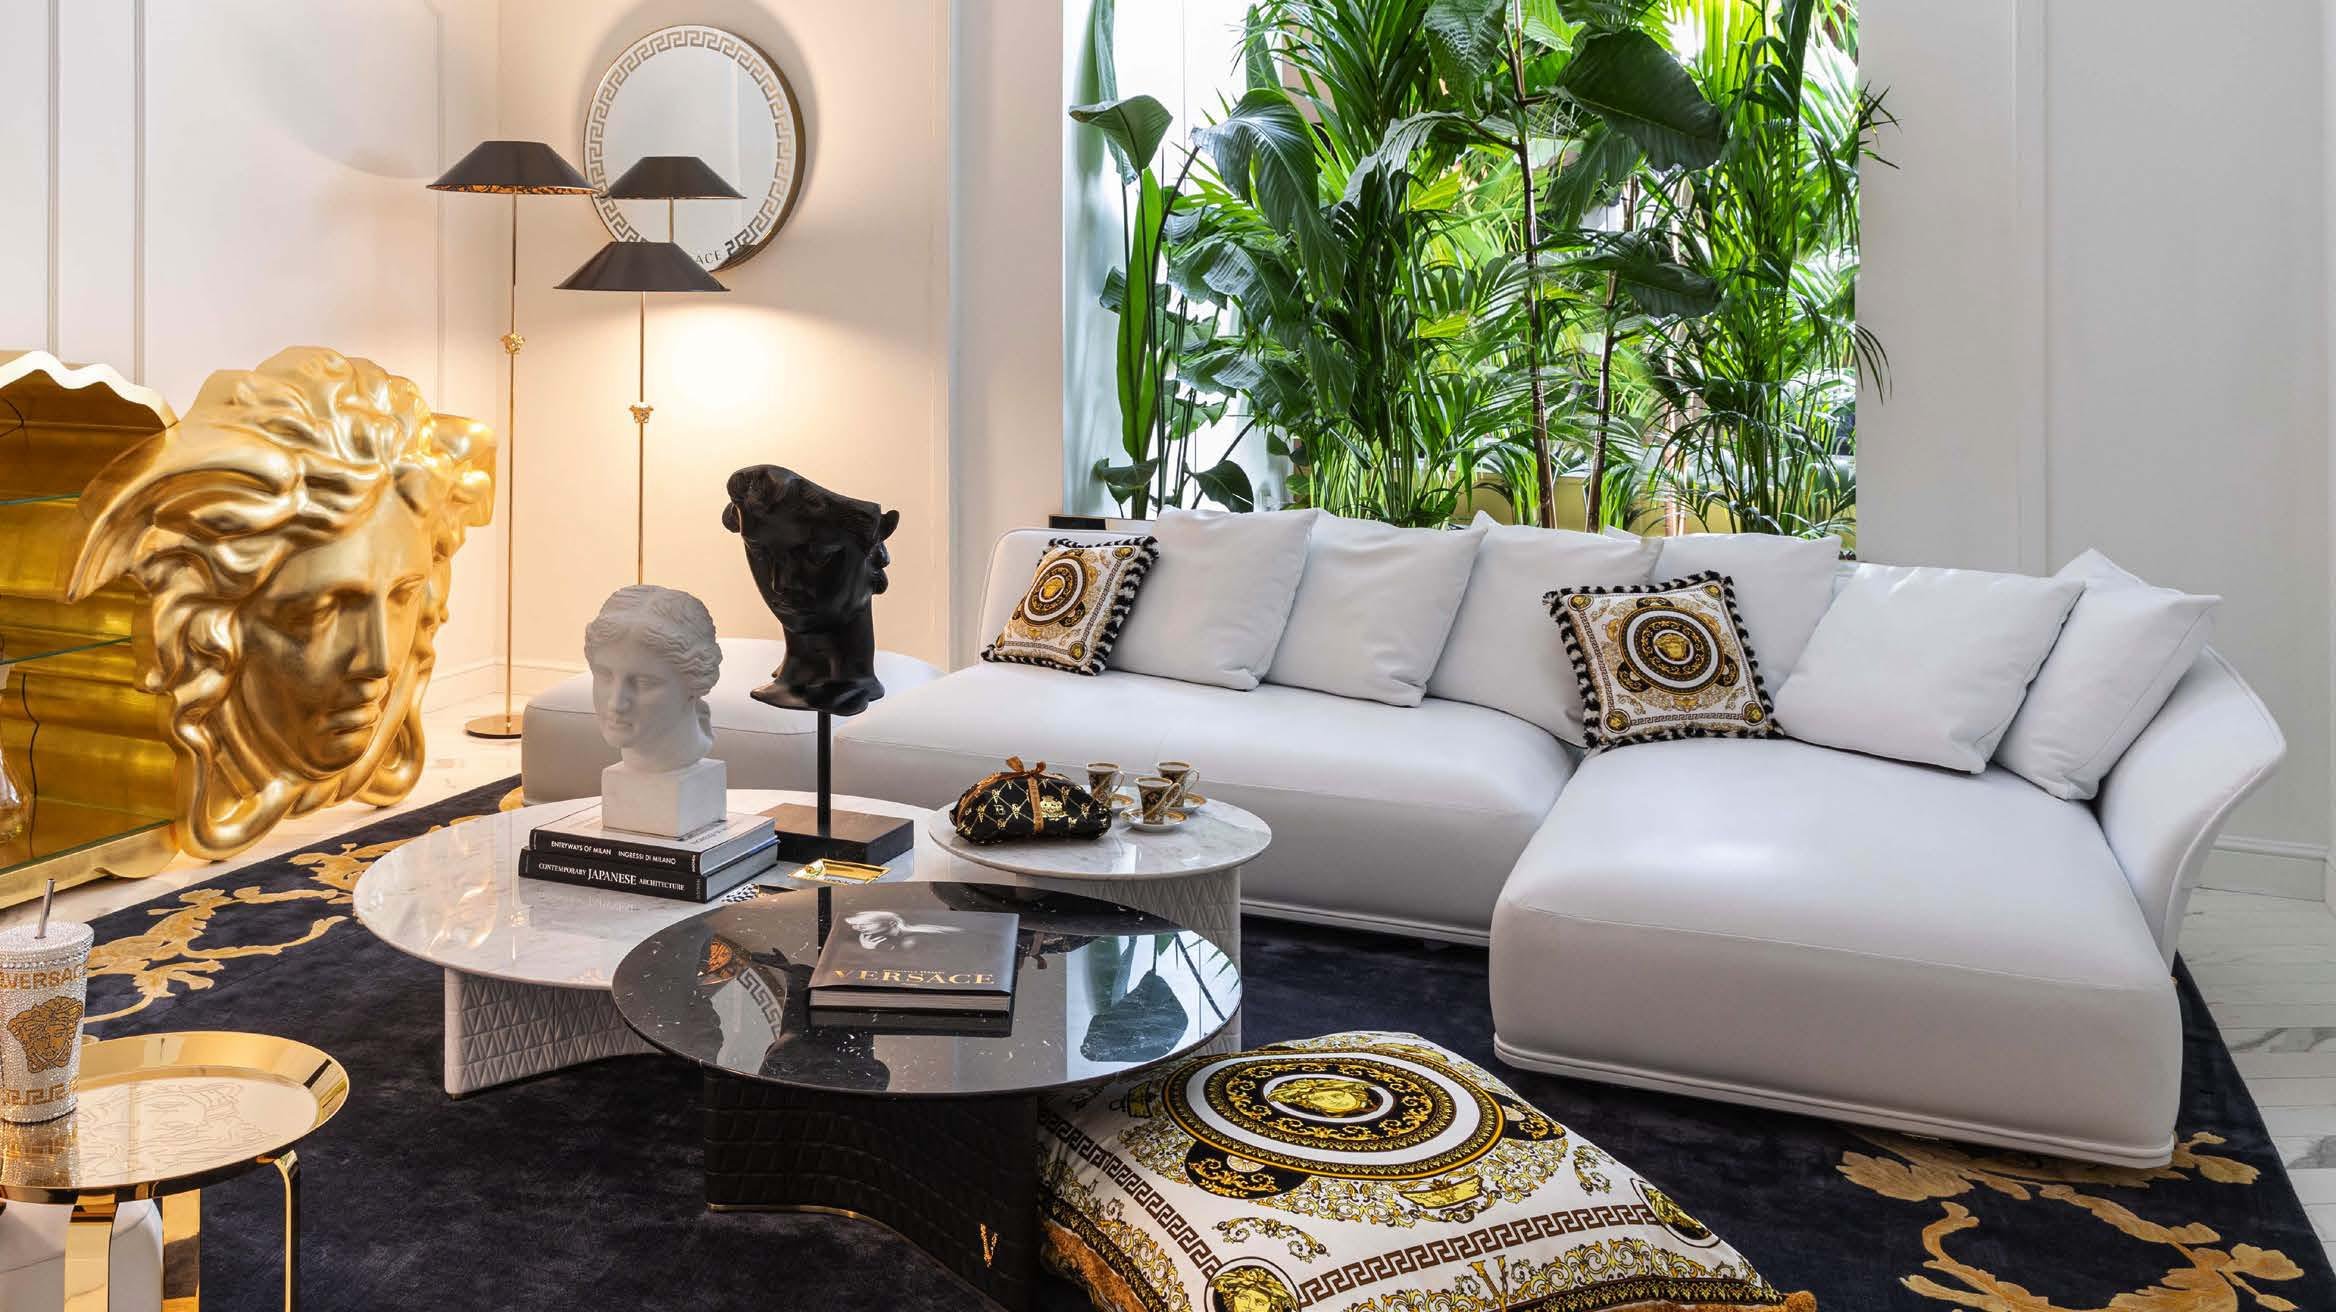 Versace Home Narcissus Ottoman